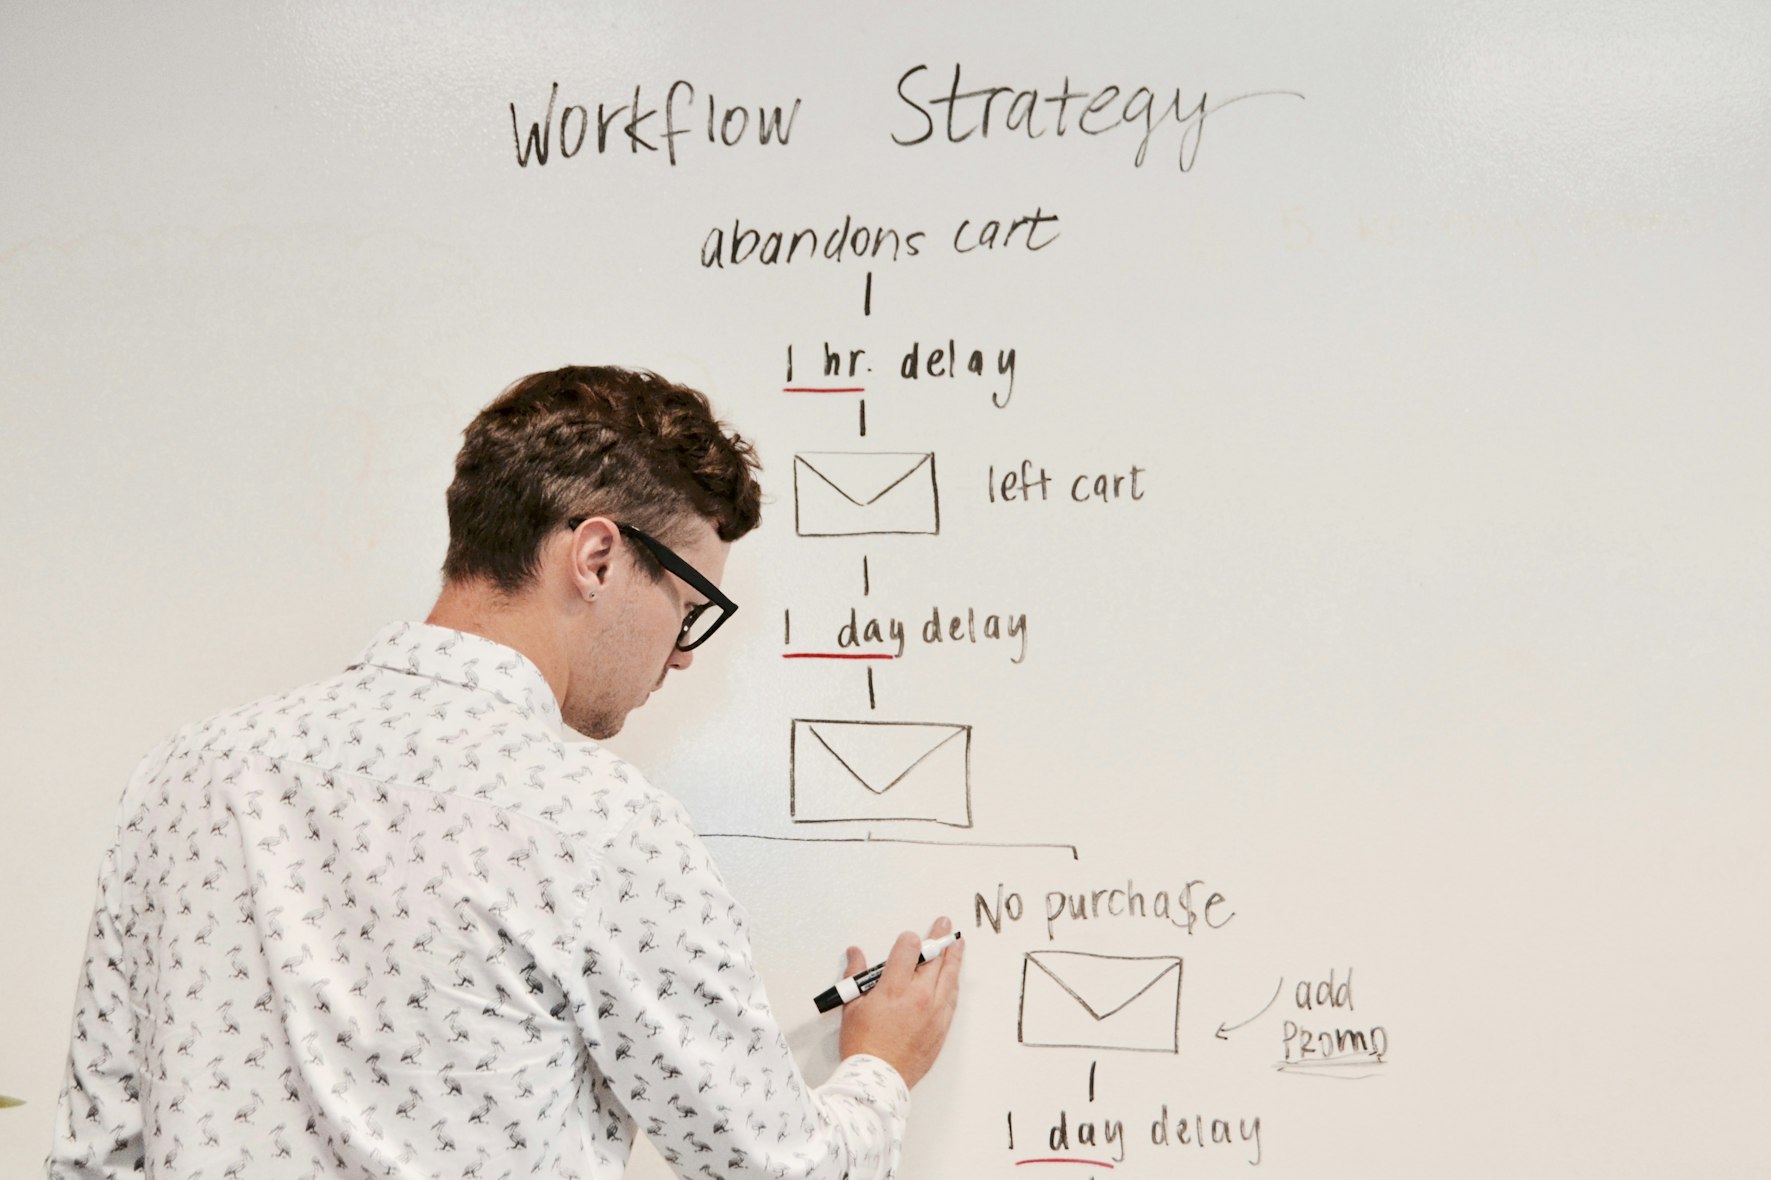 A man writing workflow strategy stages on white board.

